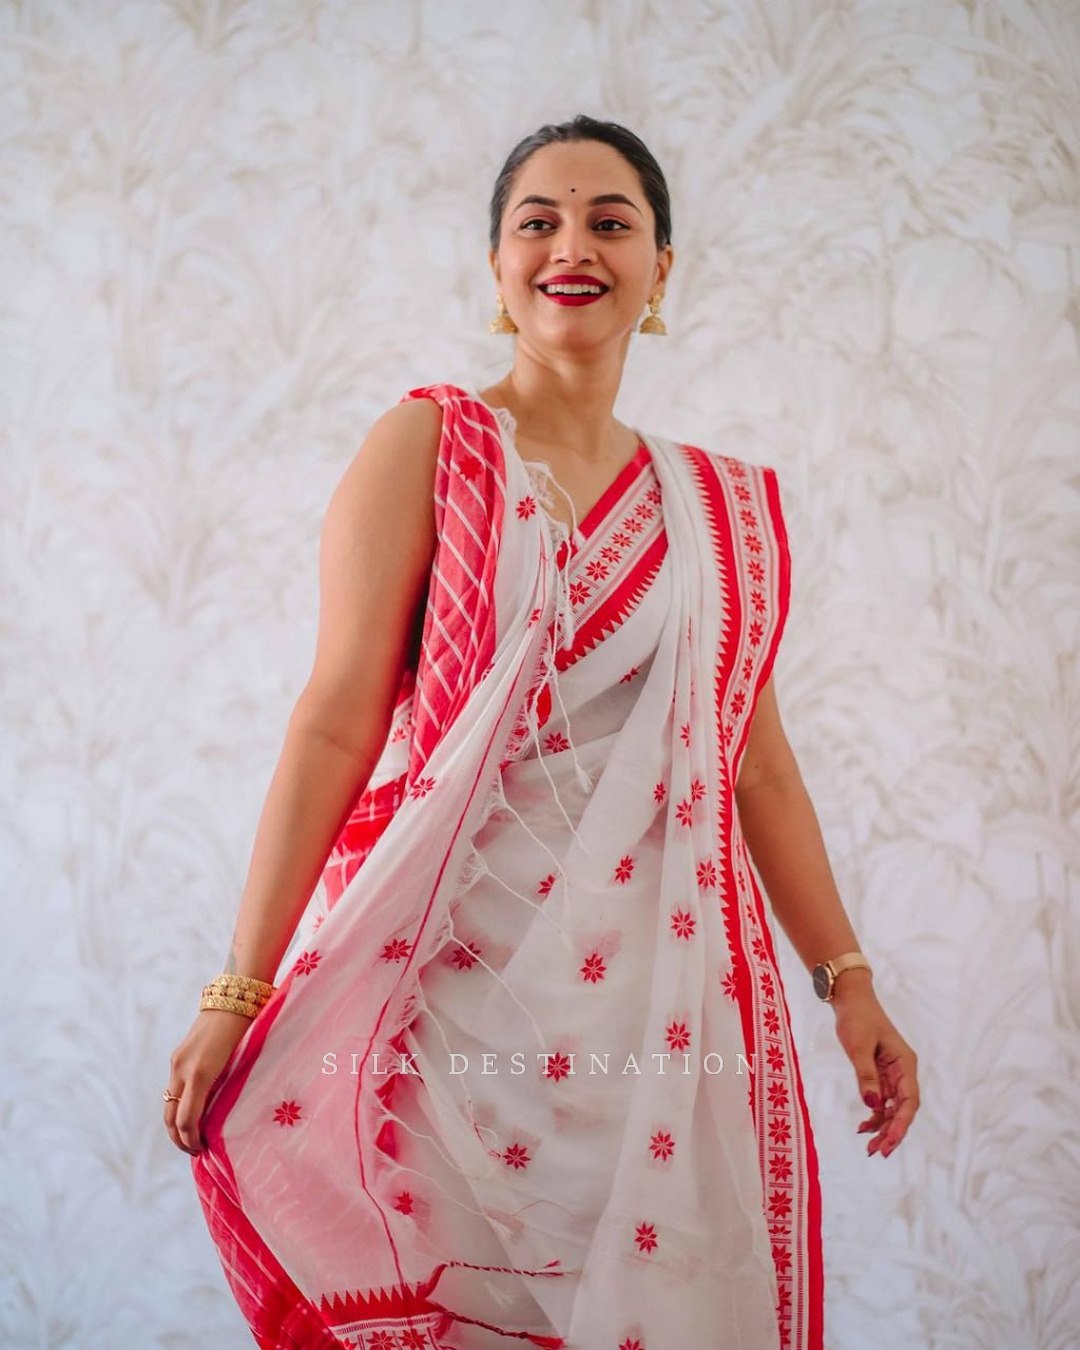 Blush Pink with Red formal design made Soft Cotton